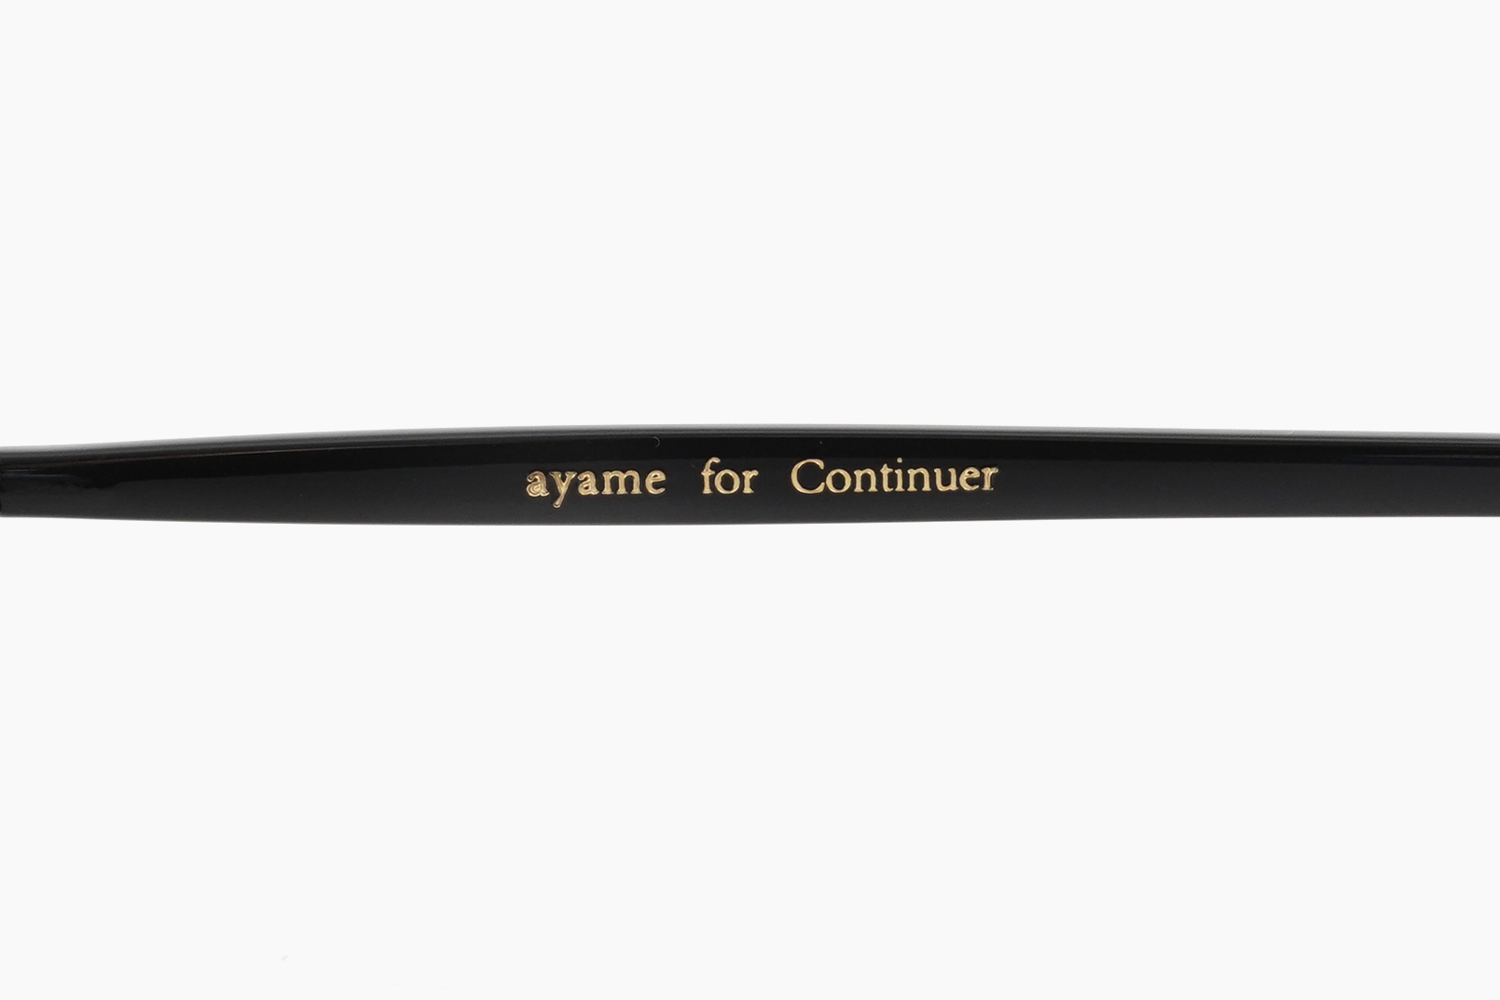 ayame for Continuer | FOCUS square SUN - BKMB｜ayame